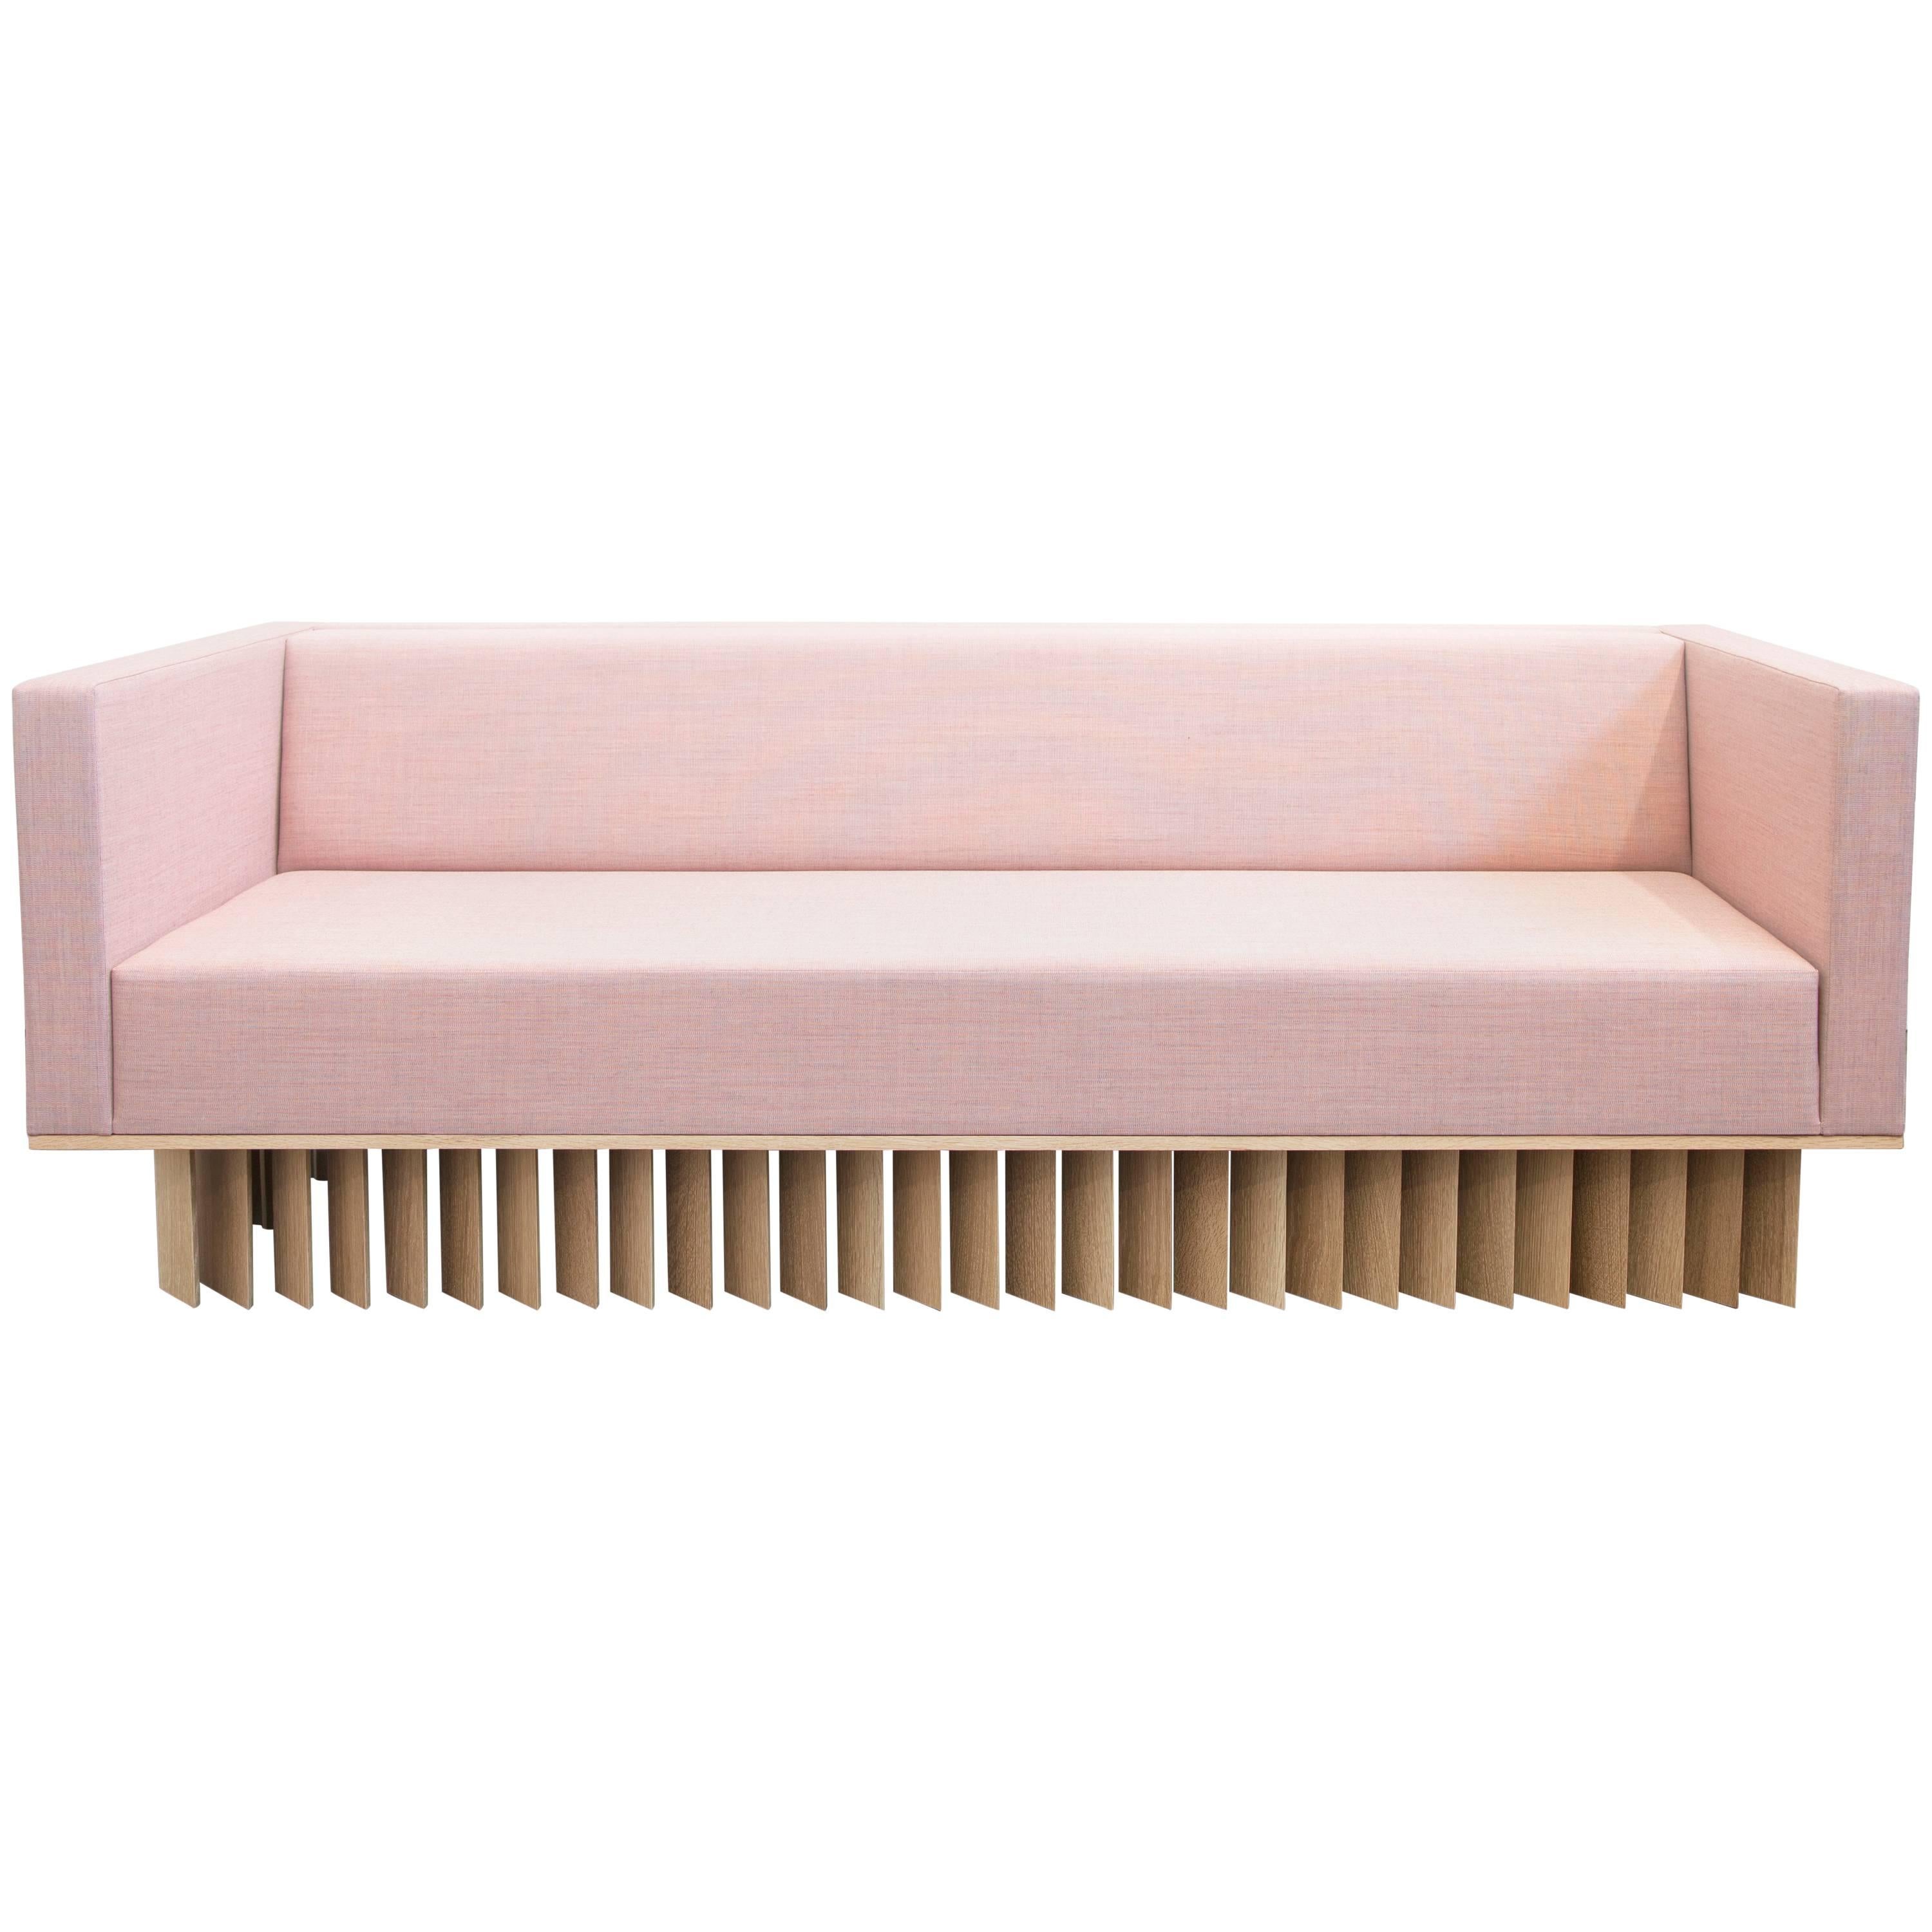 Angled Wood Bar Sofa in Oak and Pink Kvadrat Upholstery For Sale